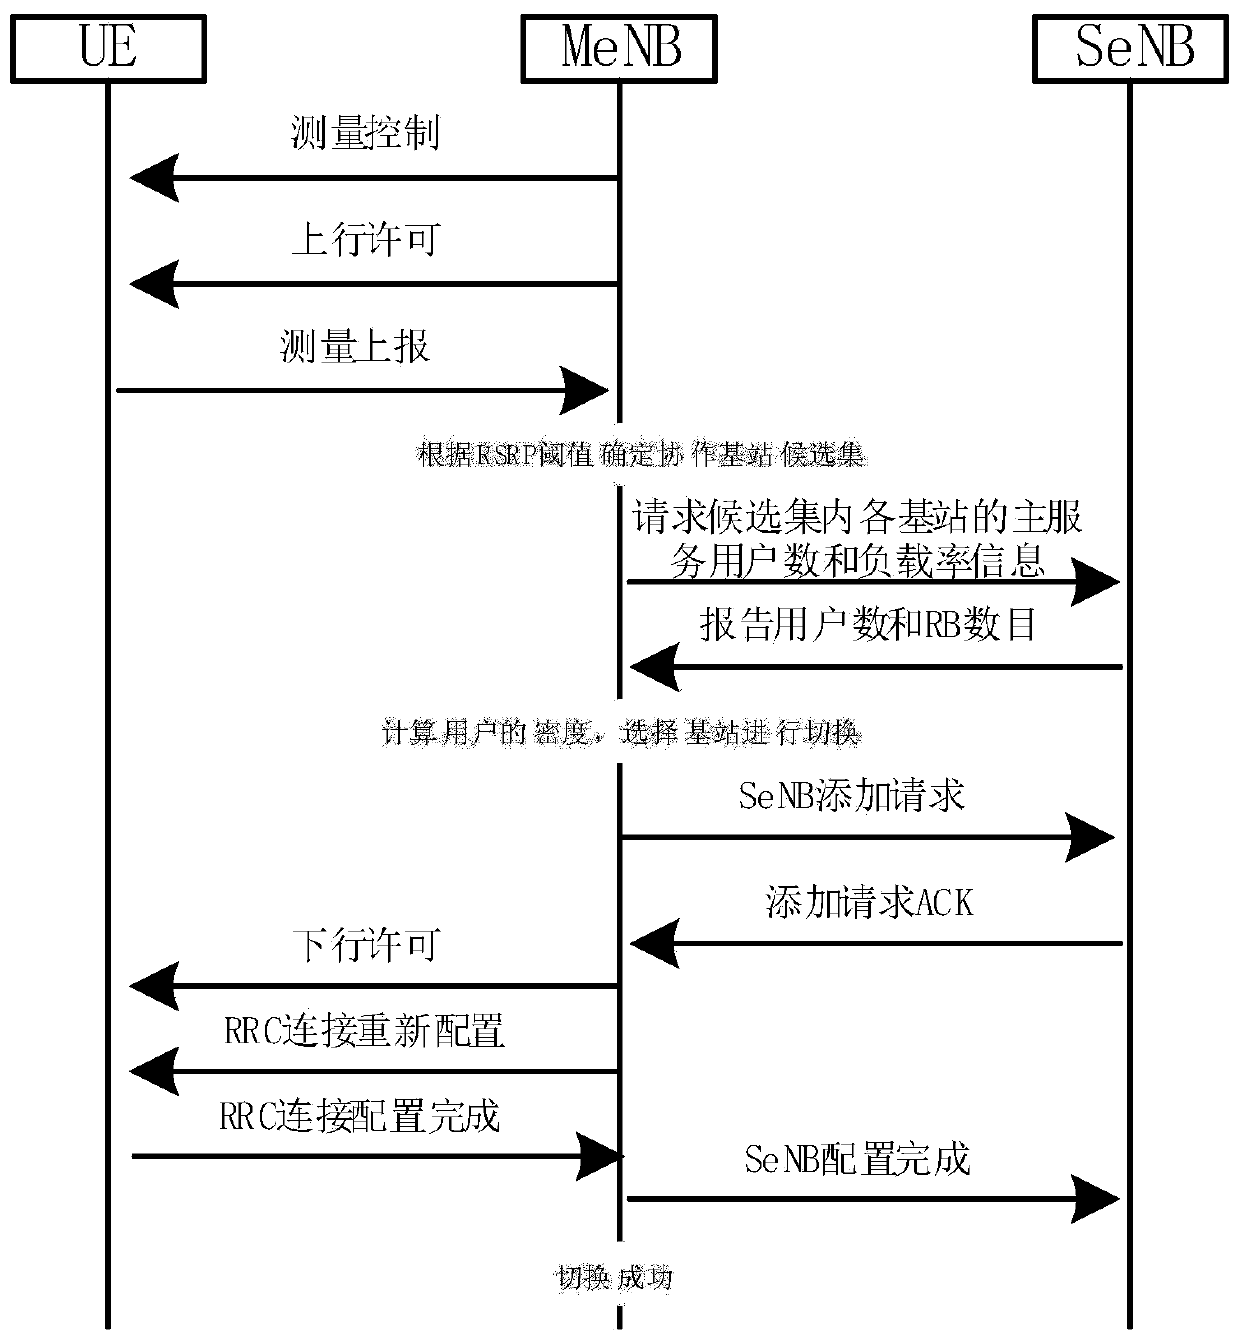 Network selection and mobility management method for power Internet of Things multi-connection technology